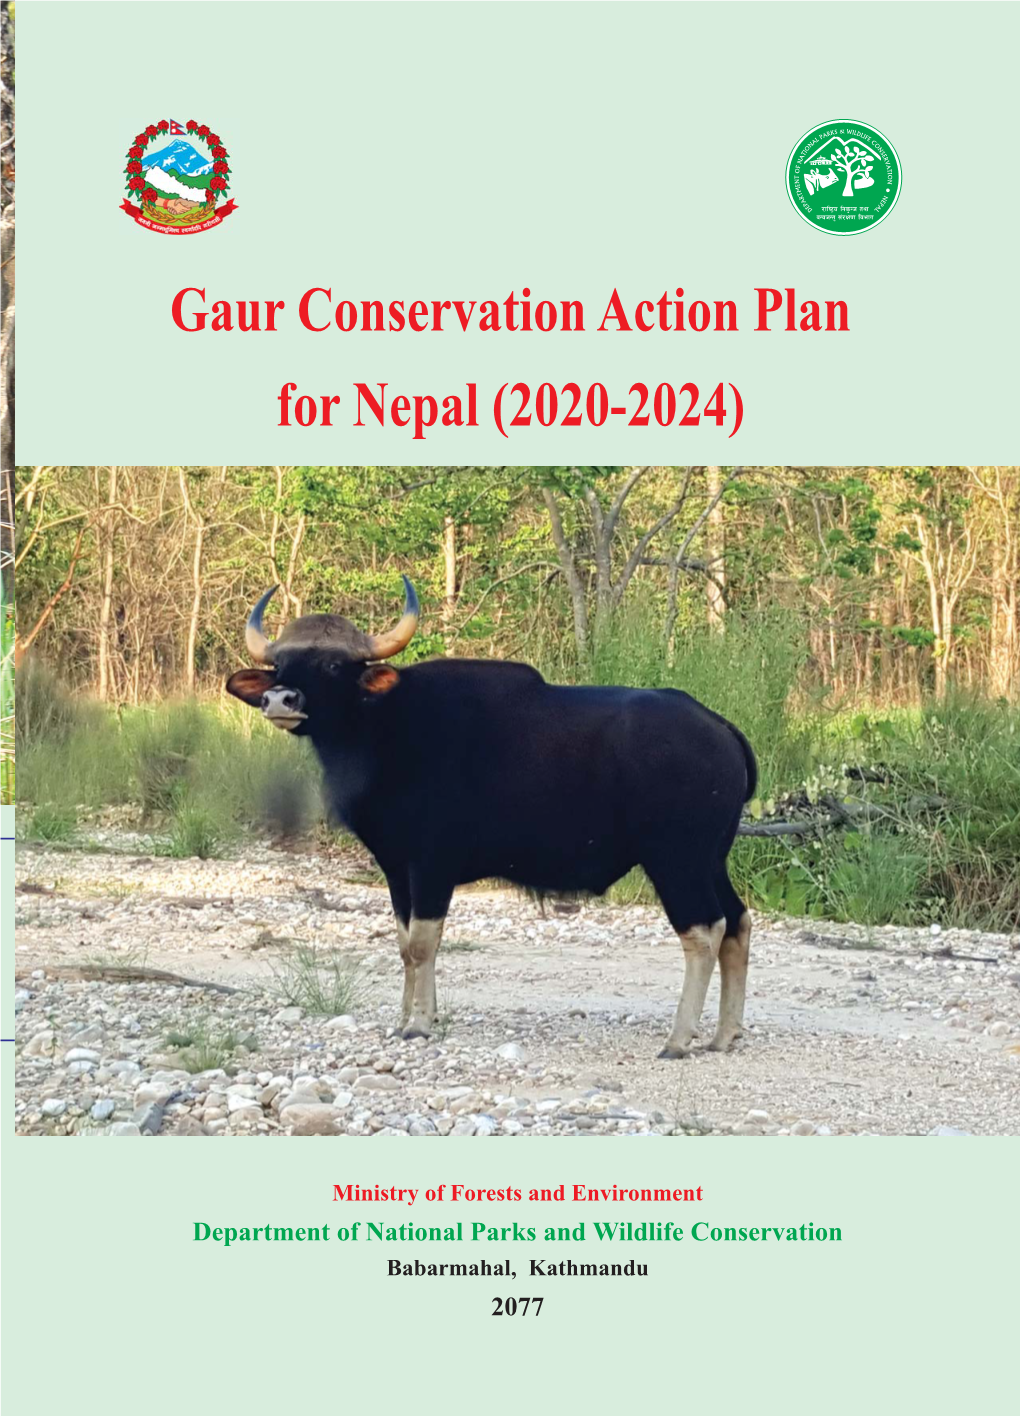 Gaur Conservation Action Plan for Nepal (2020-2024)